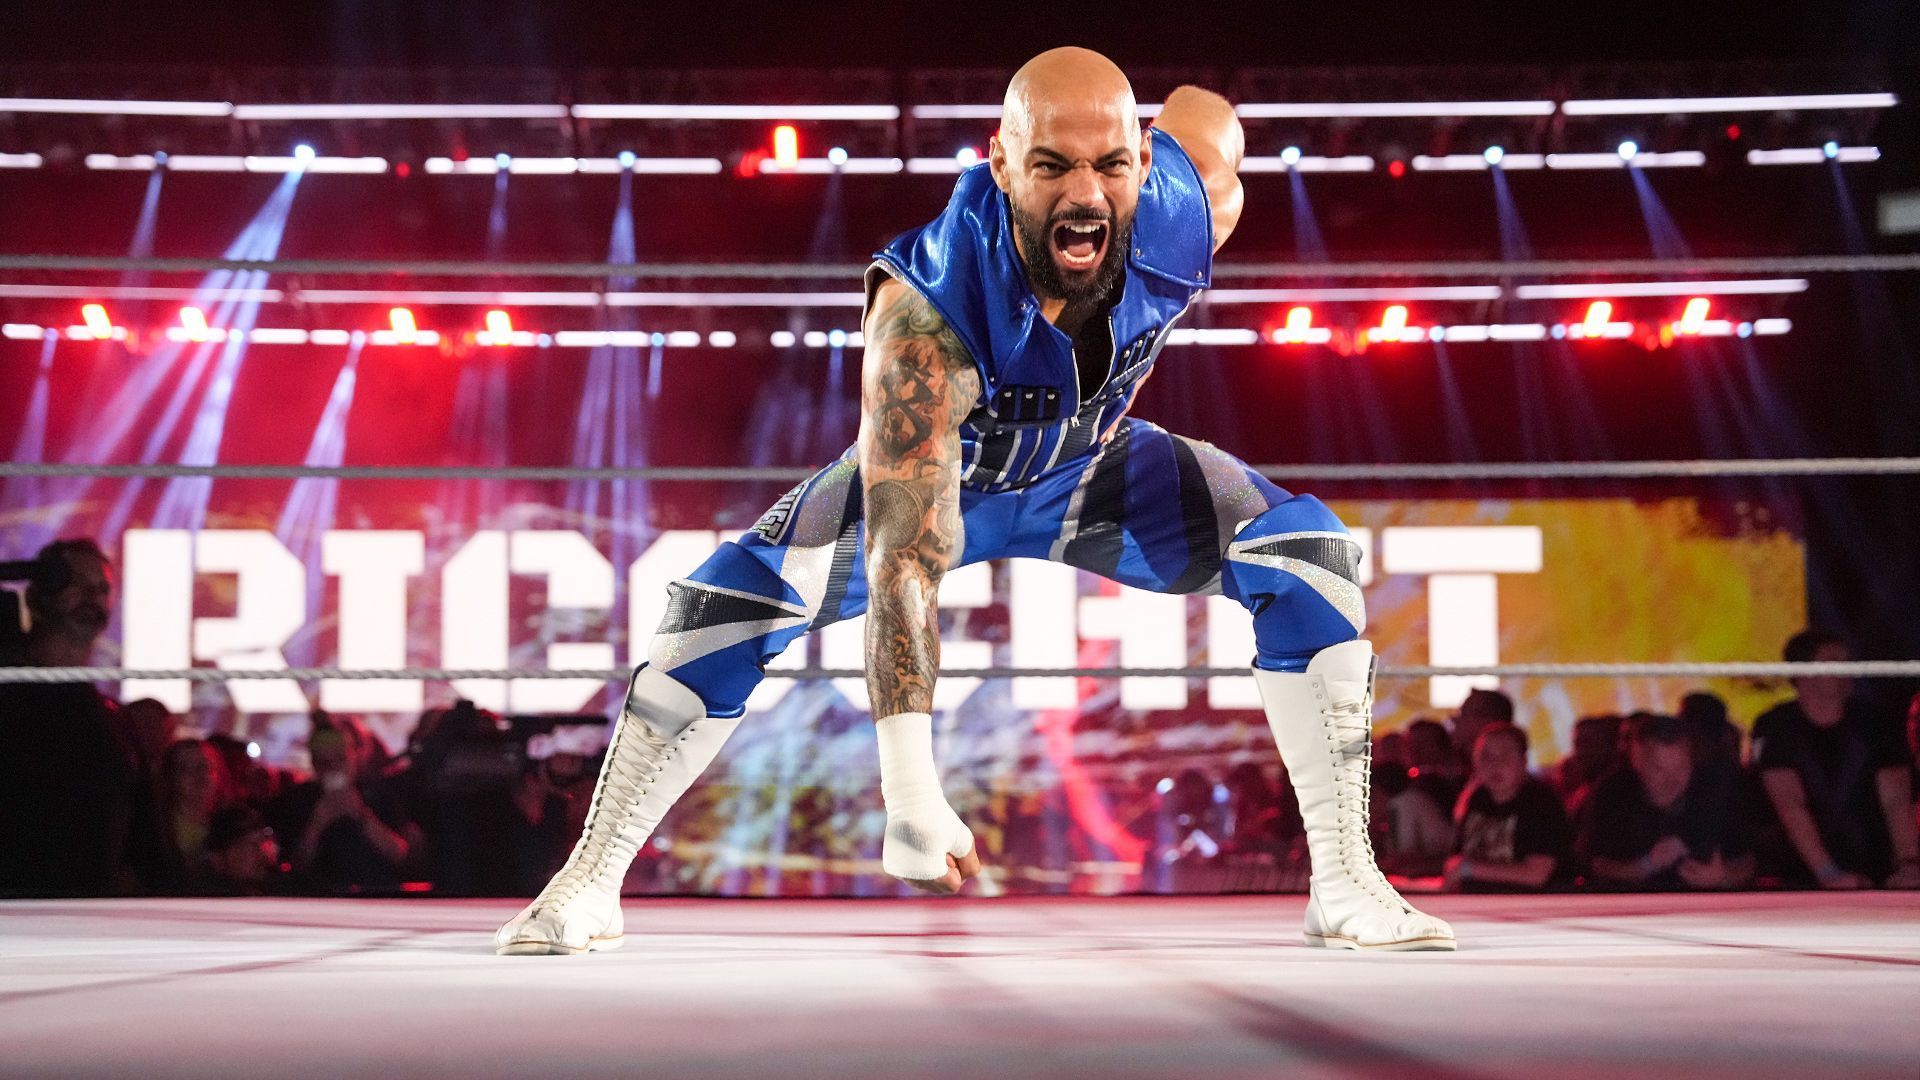 Ricochet poses in the ring on WWE RAW